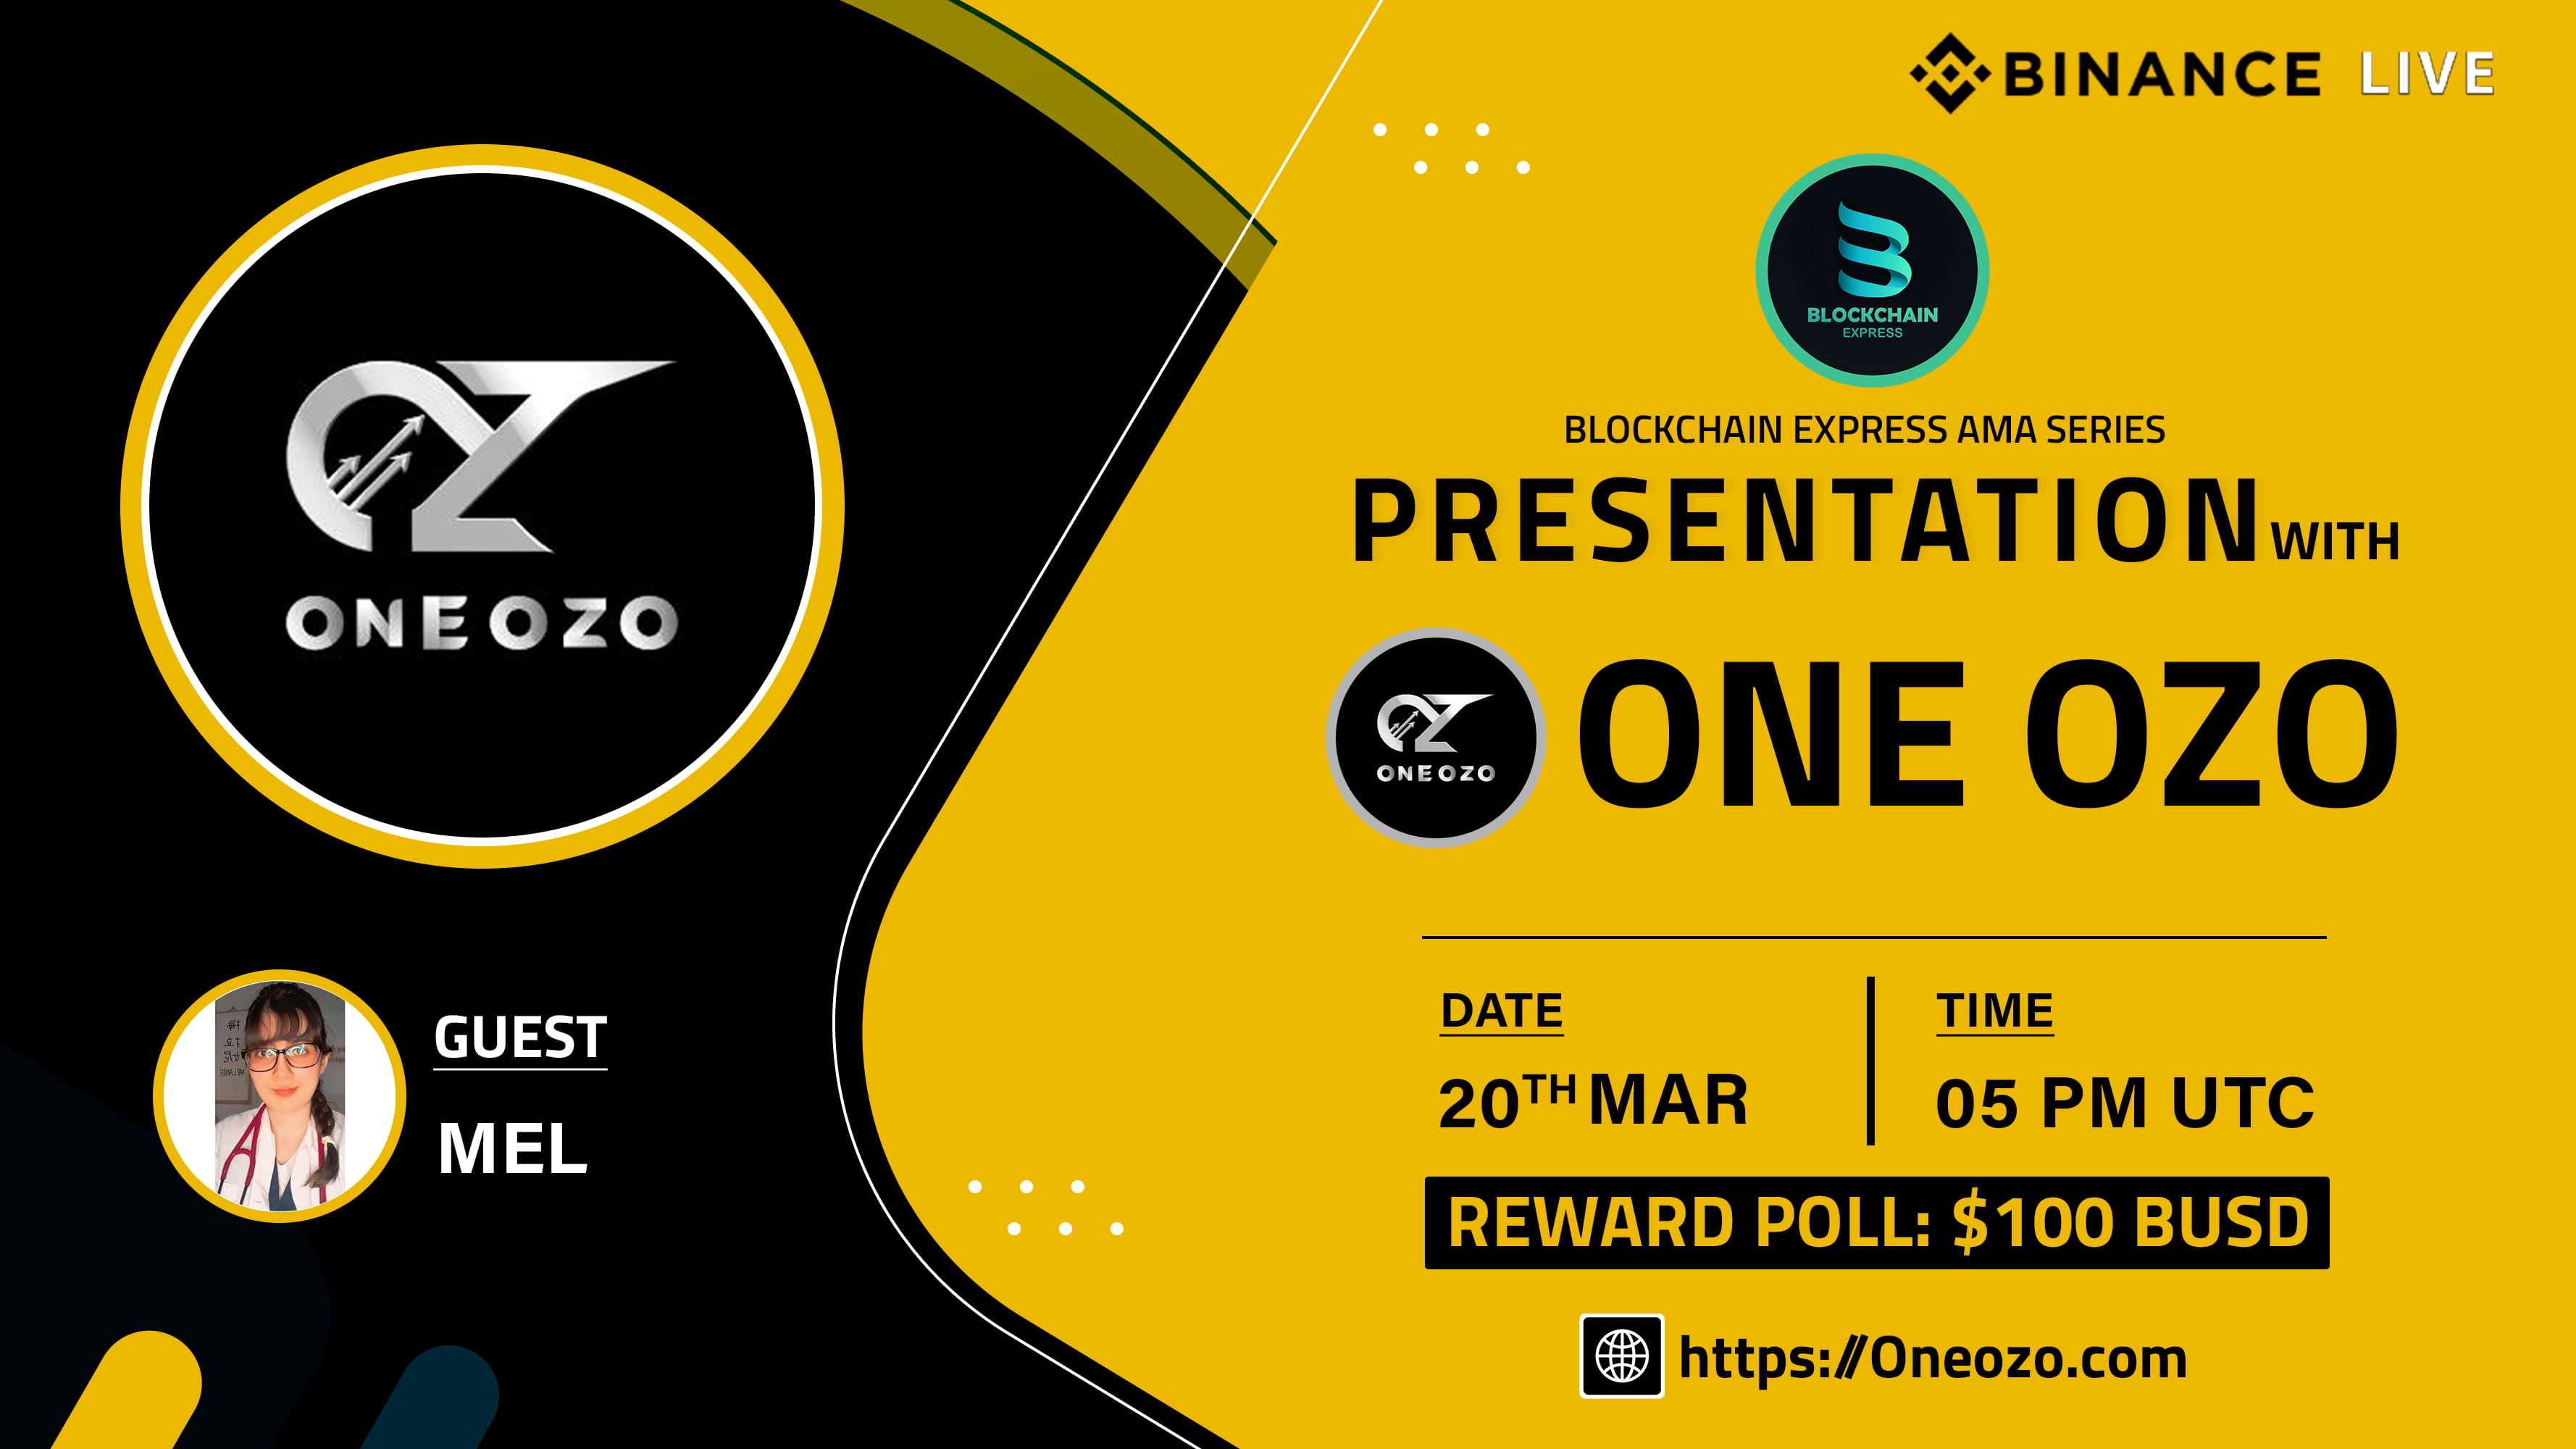 ₿lockchain Express will be hosting an presentation with" ONE OZO "